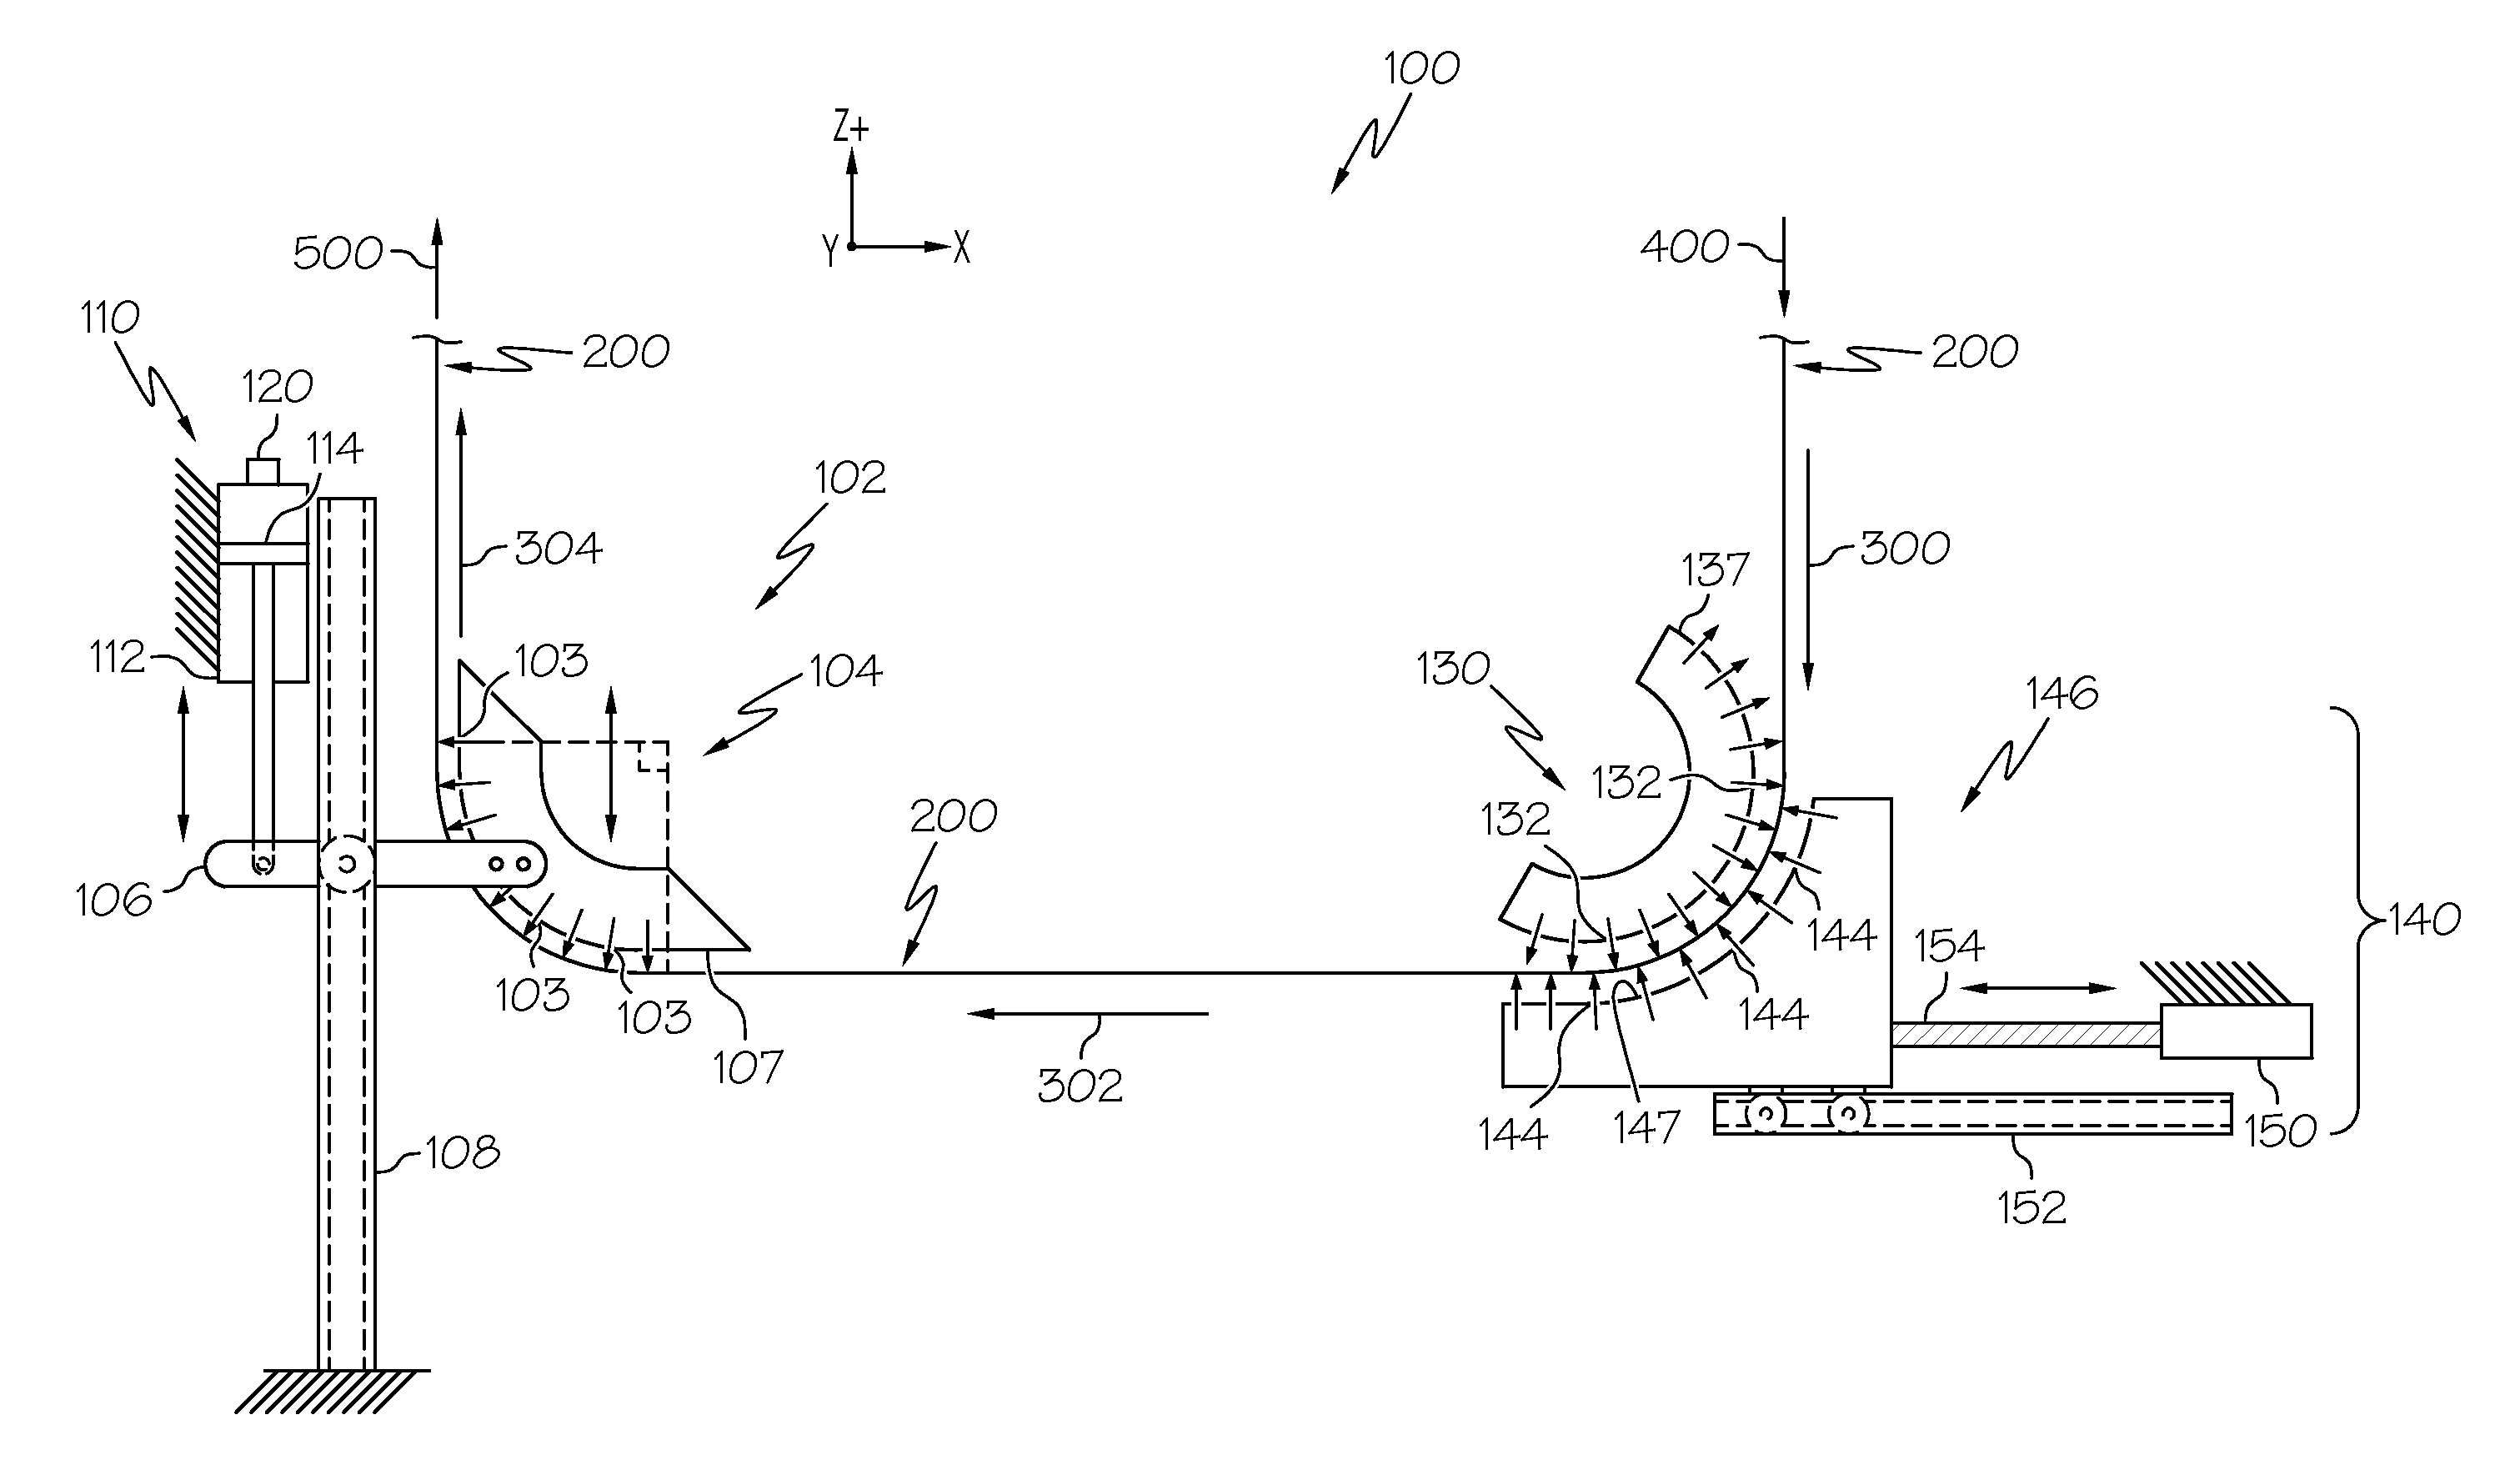 Non-contact dancer mechanisms, web isolation apparatuses and methods for using the same